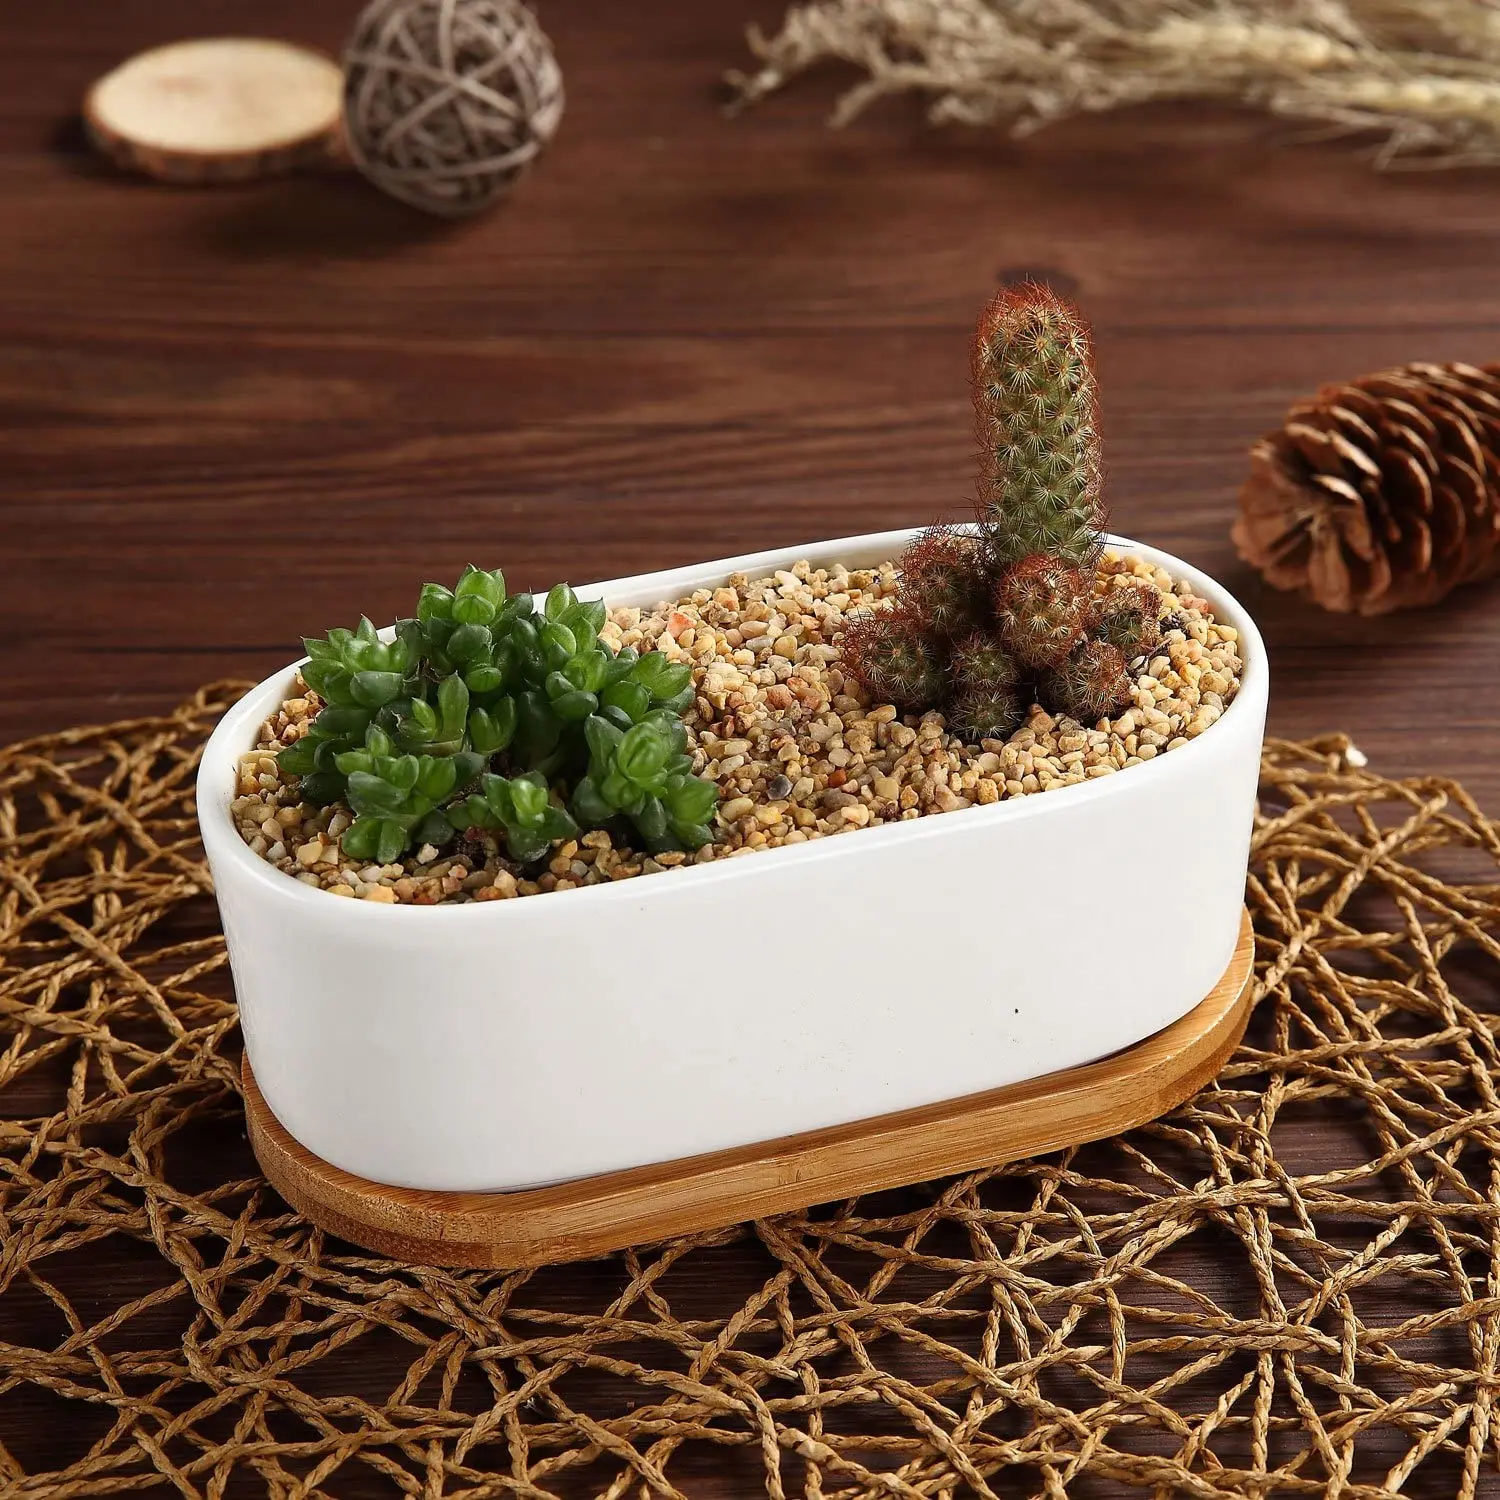 NEW 2.5 Inch Small White Succulent Planter Pots with Bamboo Tray Set of 3 